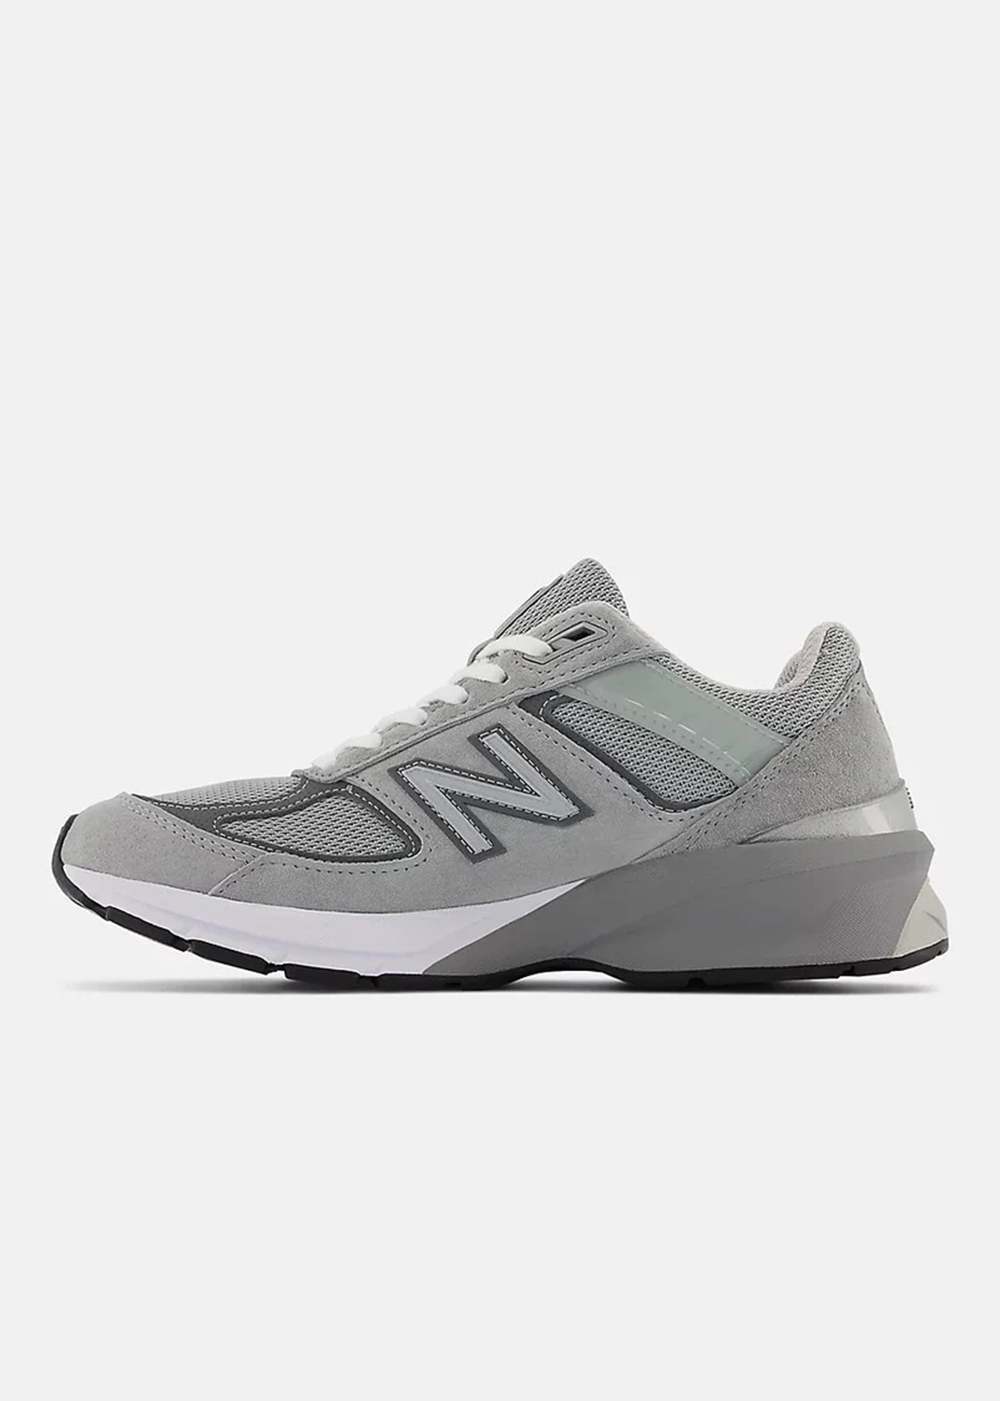 New Balance 990v5 Made in USA Sneakers - Grey